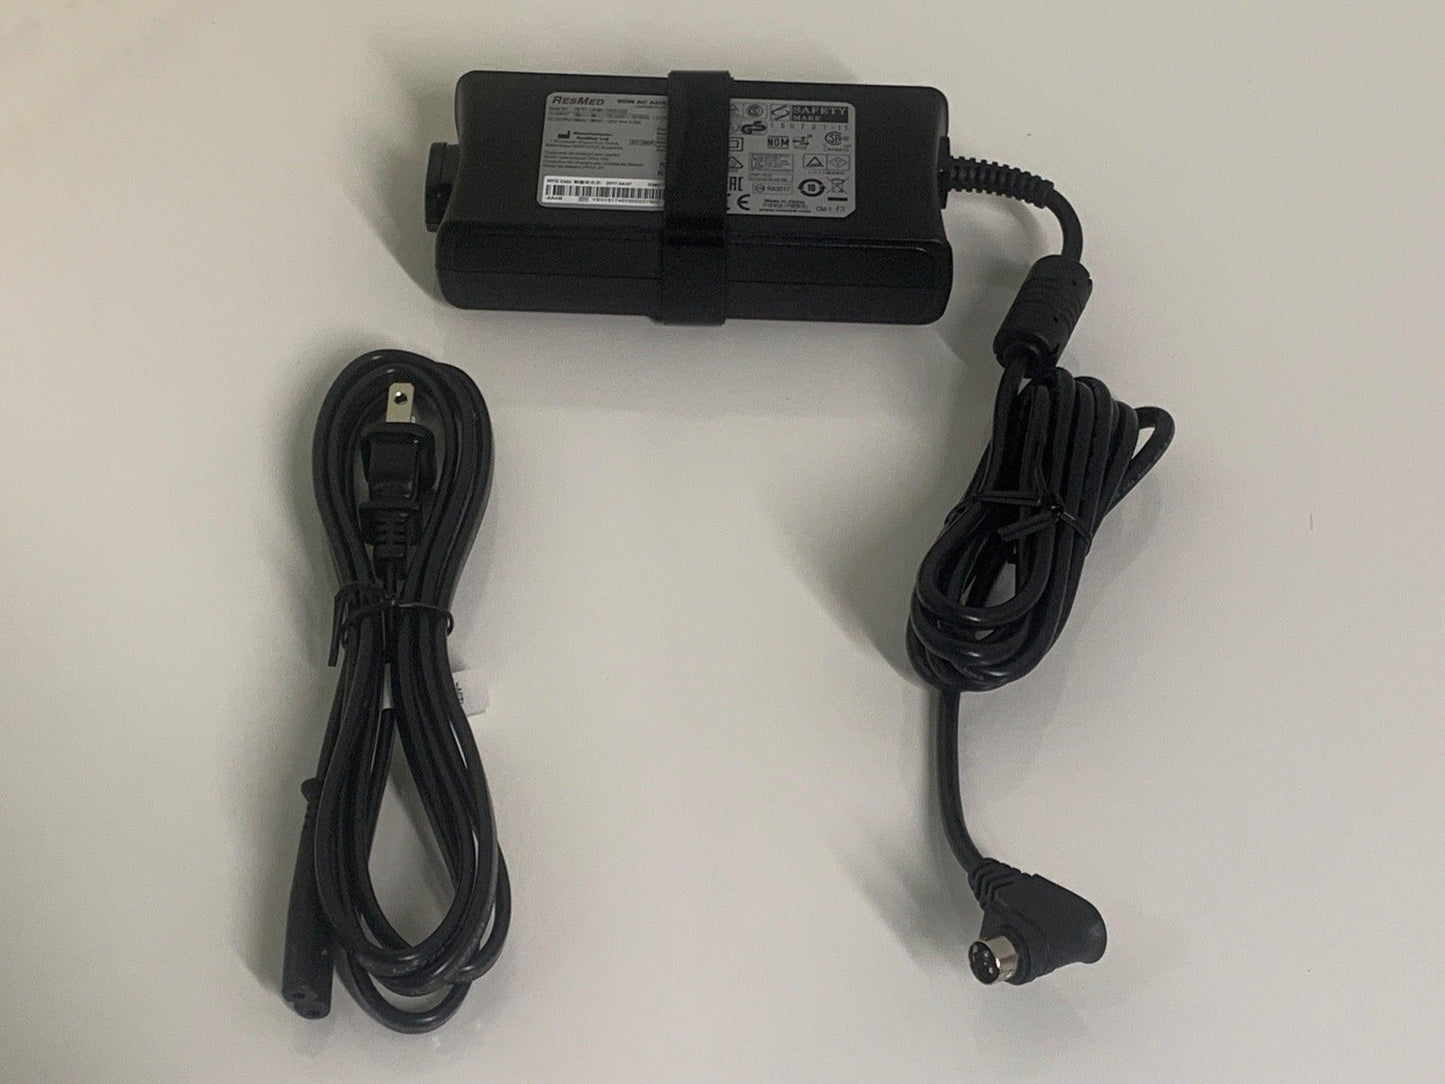 NEW Demo Open Box ResMed Model 369102 S9 CPAP 90W AC Power Supply Unit (PSU) 36821 - MBR Medicals